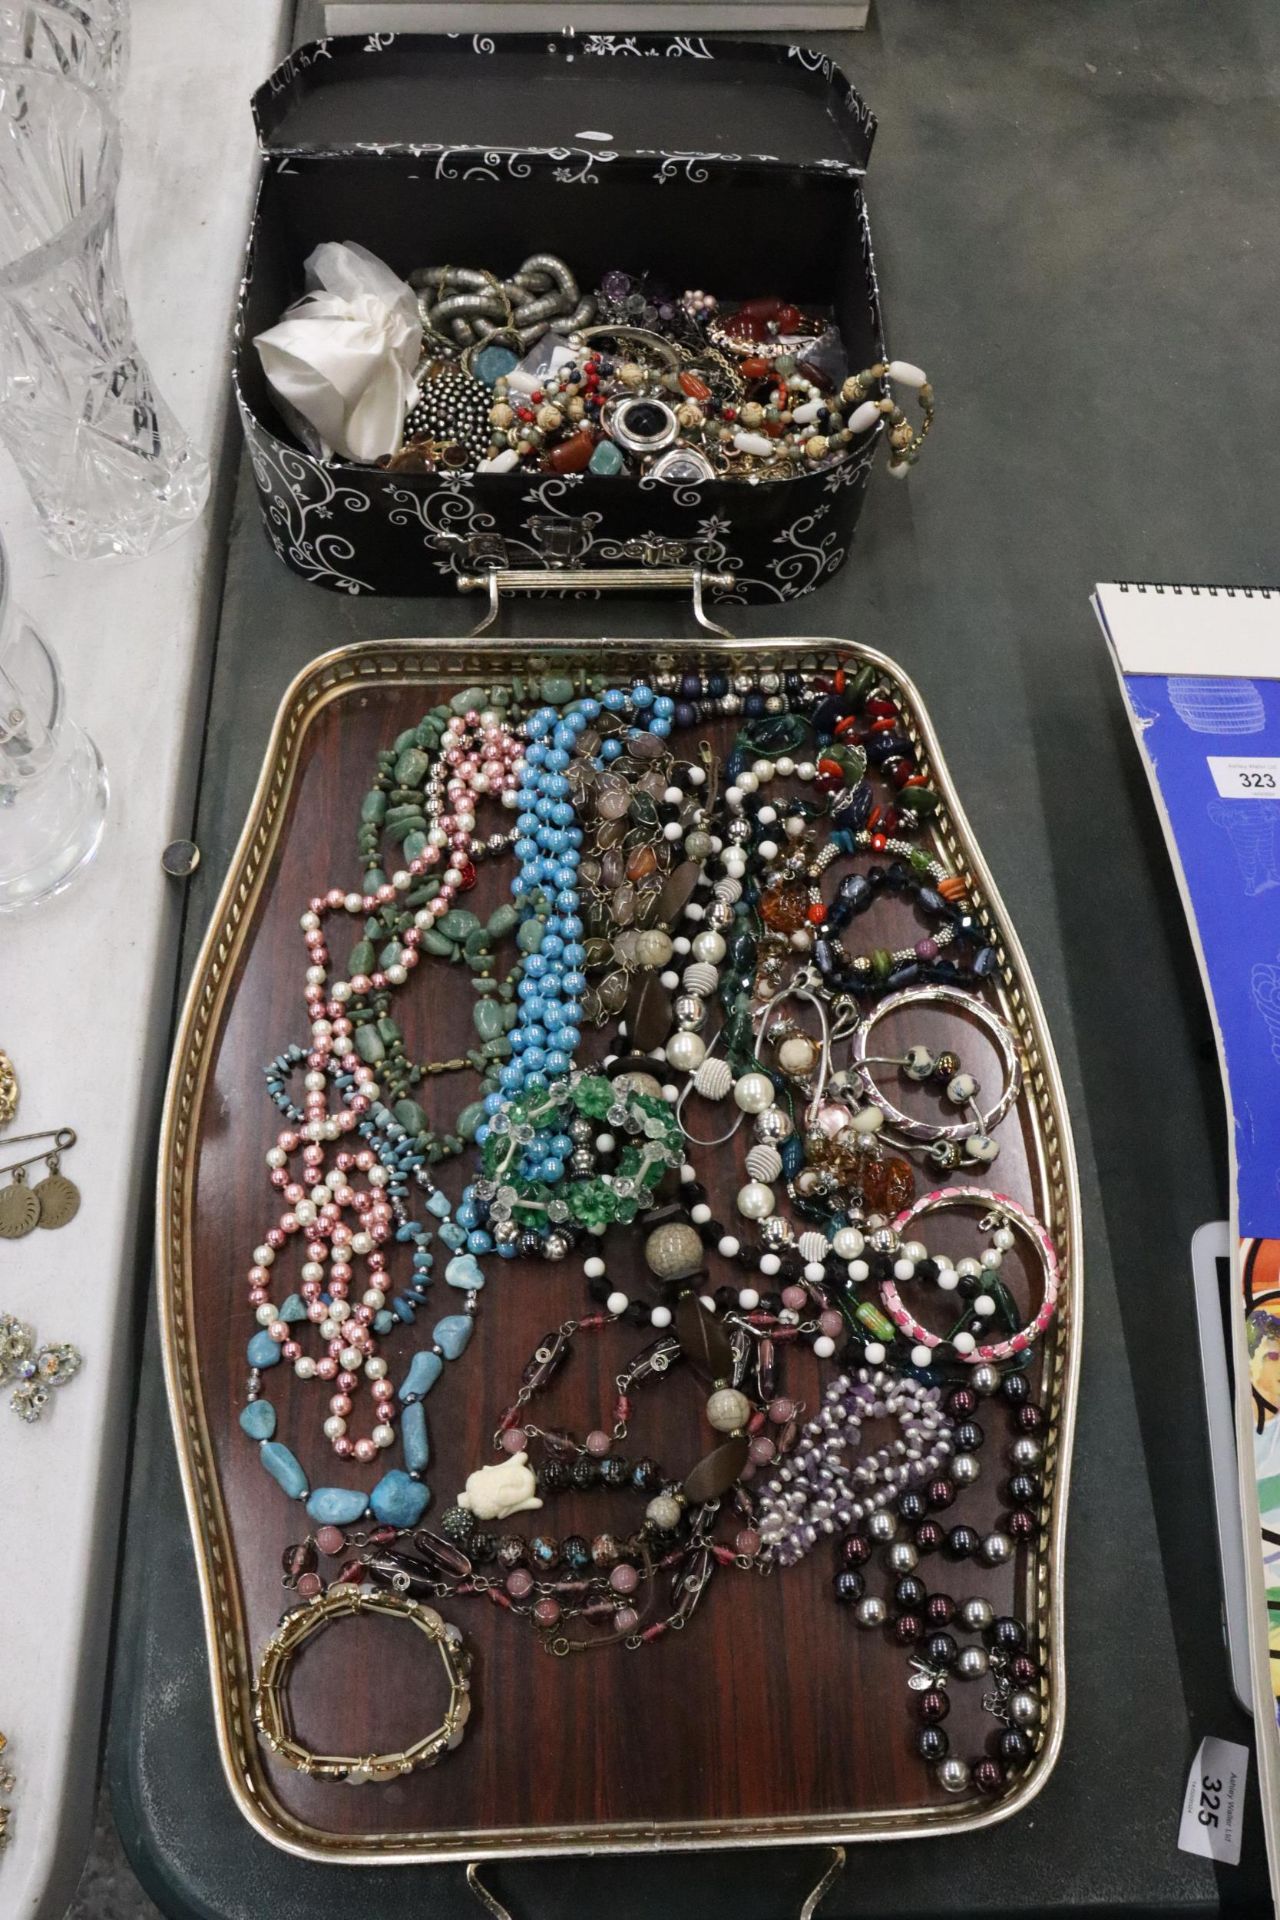 A QUANTITY OF COSTUME JEWELLERY TO INCLUDE NECKLACES, BRACELETS, BEADS, BROOCHES, ETC, WITH A VANITY